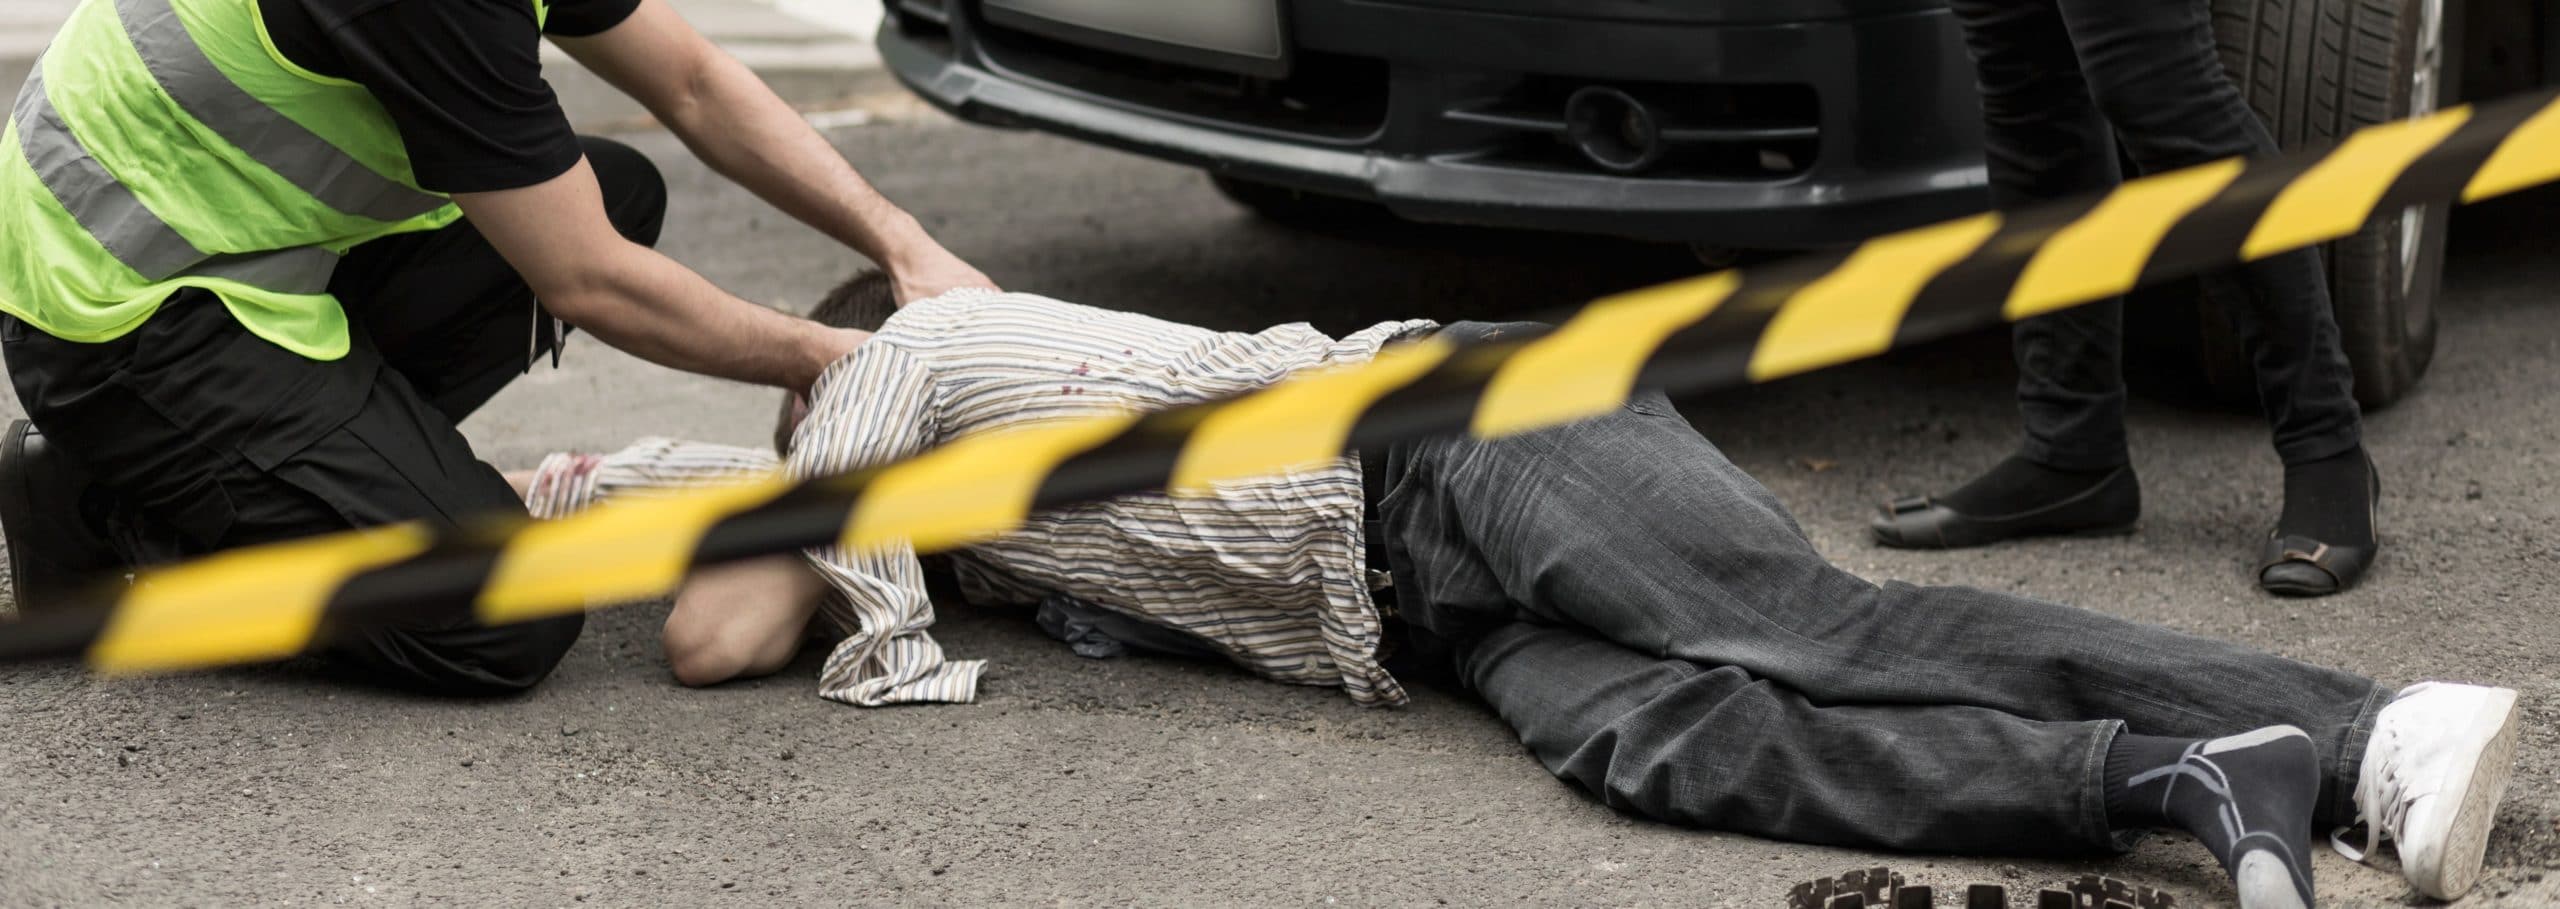 Chiropractors Can Help If You Were Walking and a Car Injured You